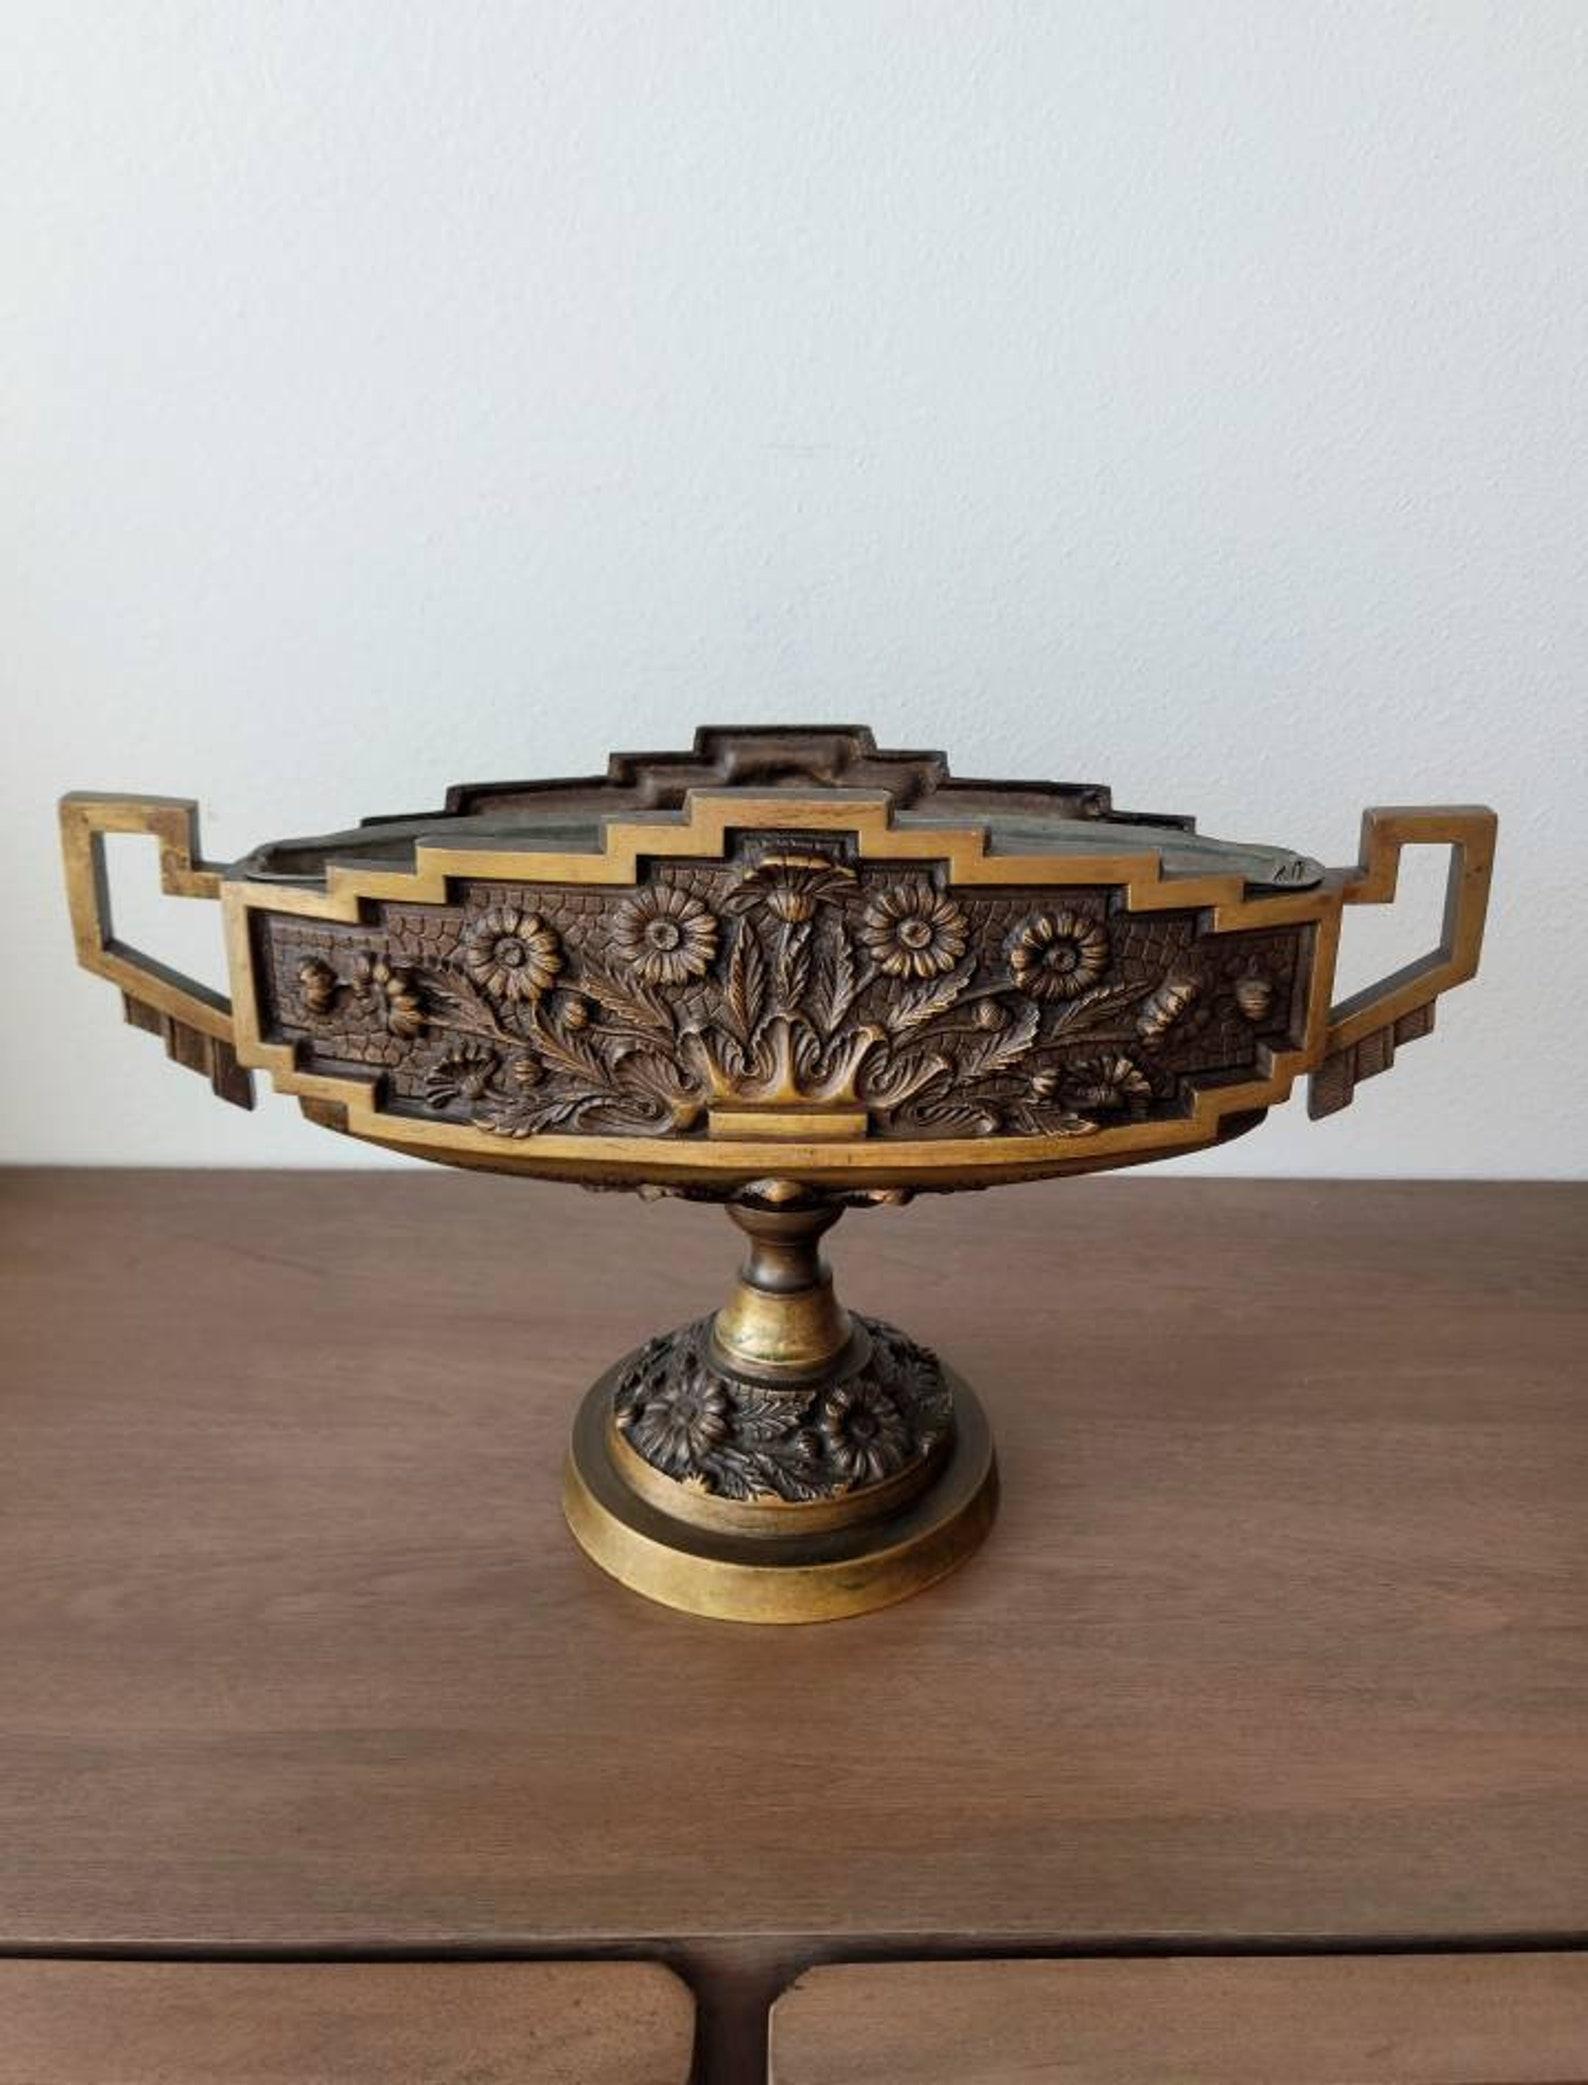 An excellent quality sculptural Art Deco patinated bronze jardinière (can be used a variety of different ways, including as an indoor planter box / centerpiece / tazza /center bowl / candy dish).

Dating to the early 20th century, fitted with a